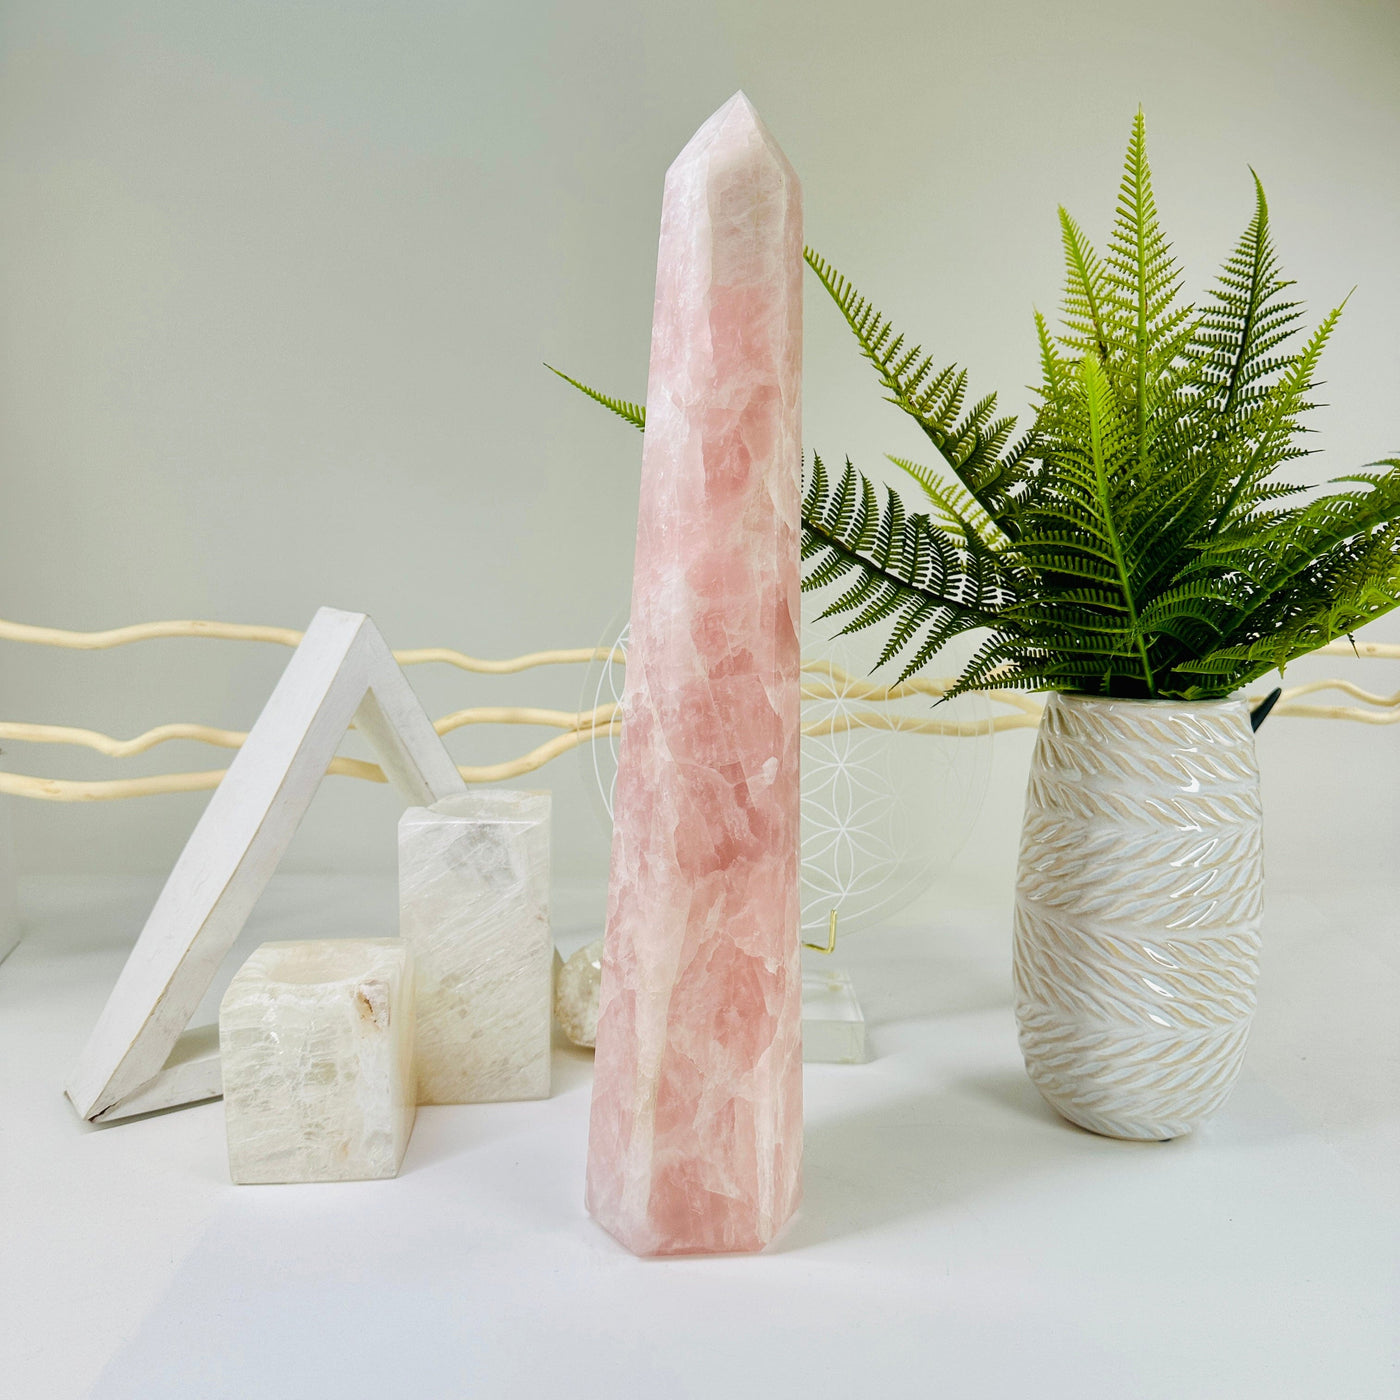 Rose Quartz Polished Crystal Tower - OOAK front view